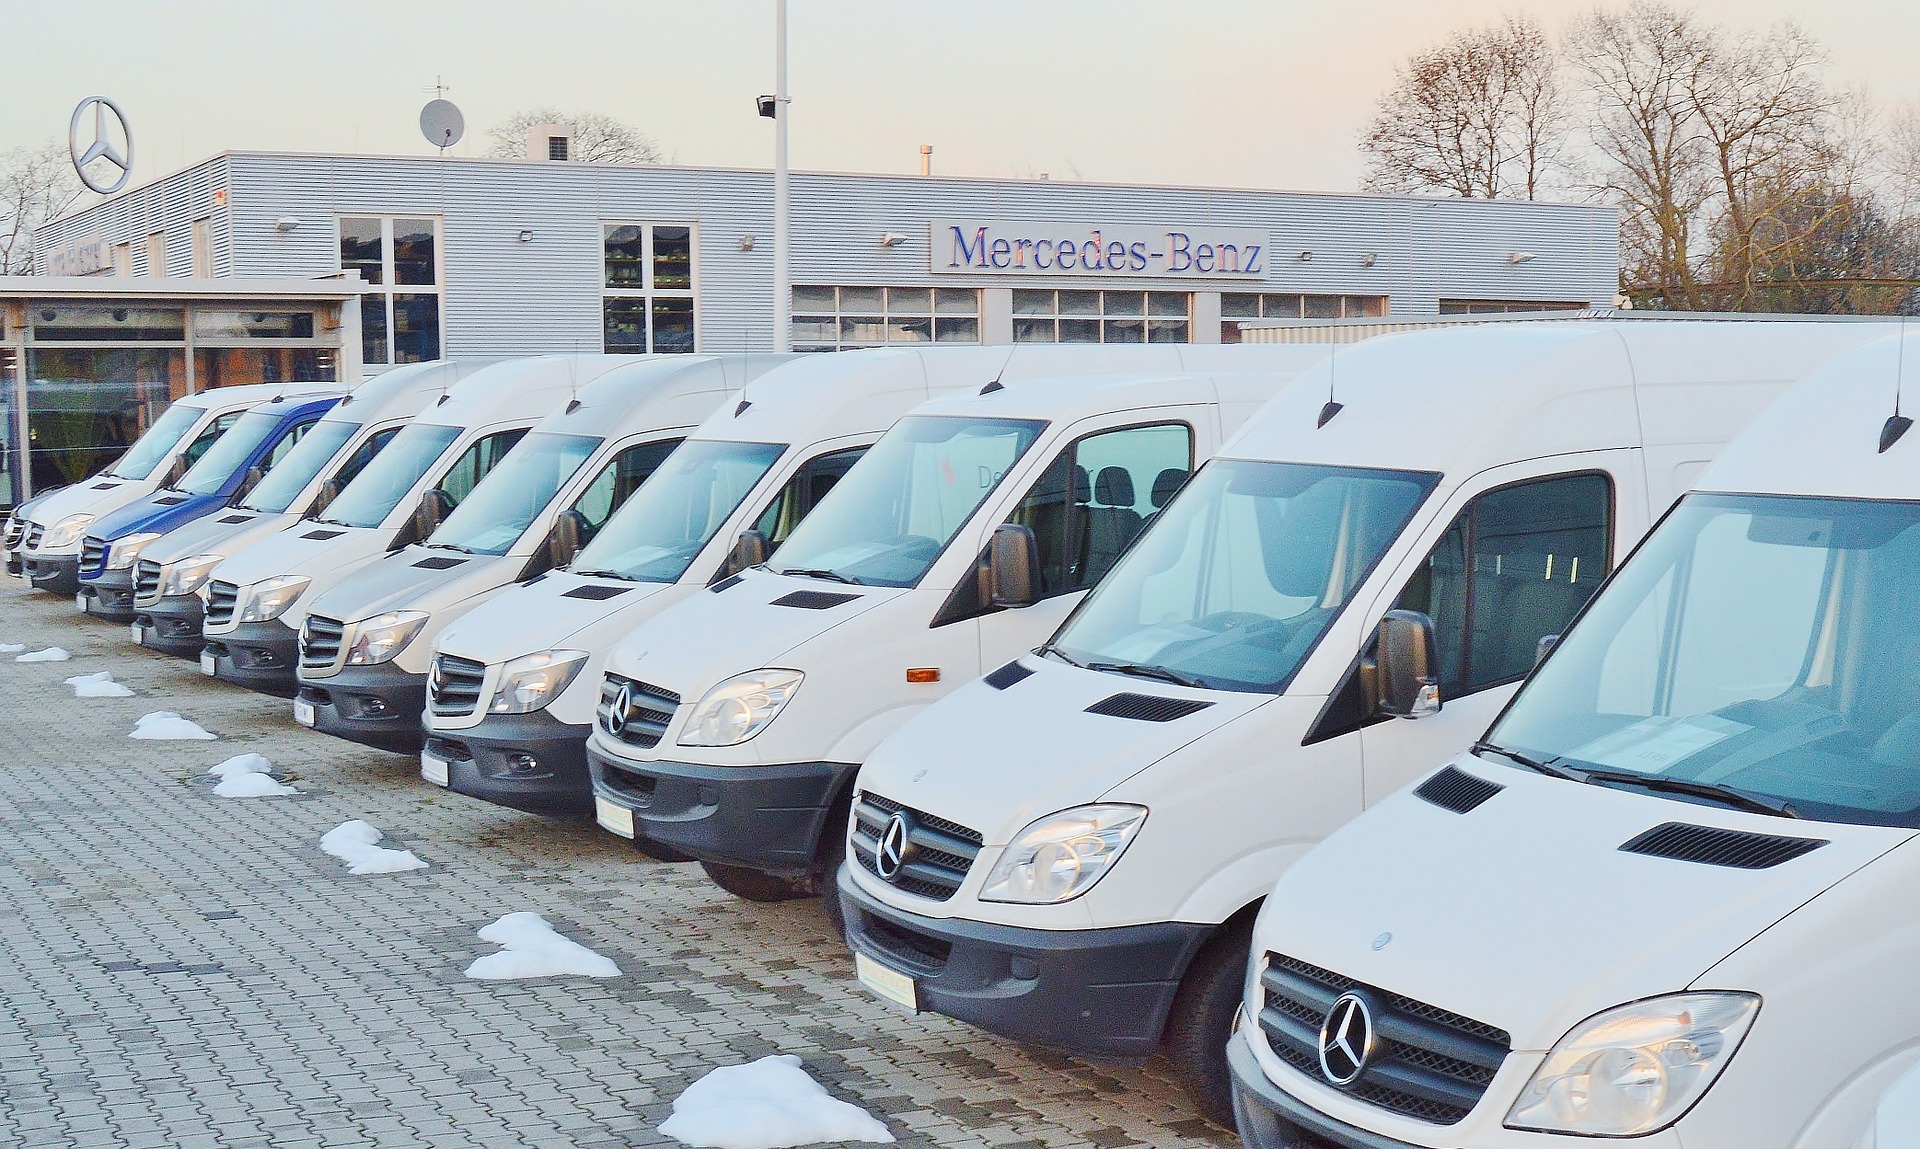  A fleet of white vans that are parked  